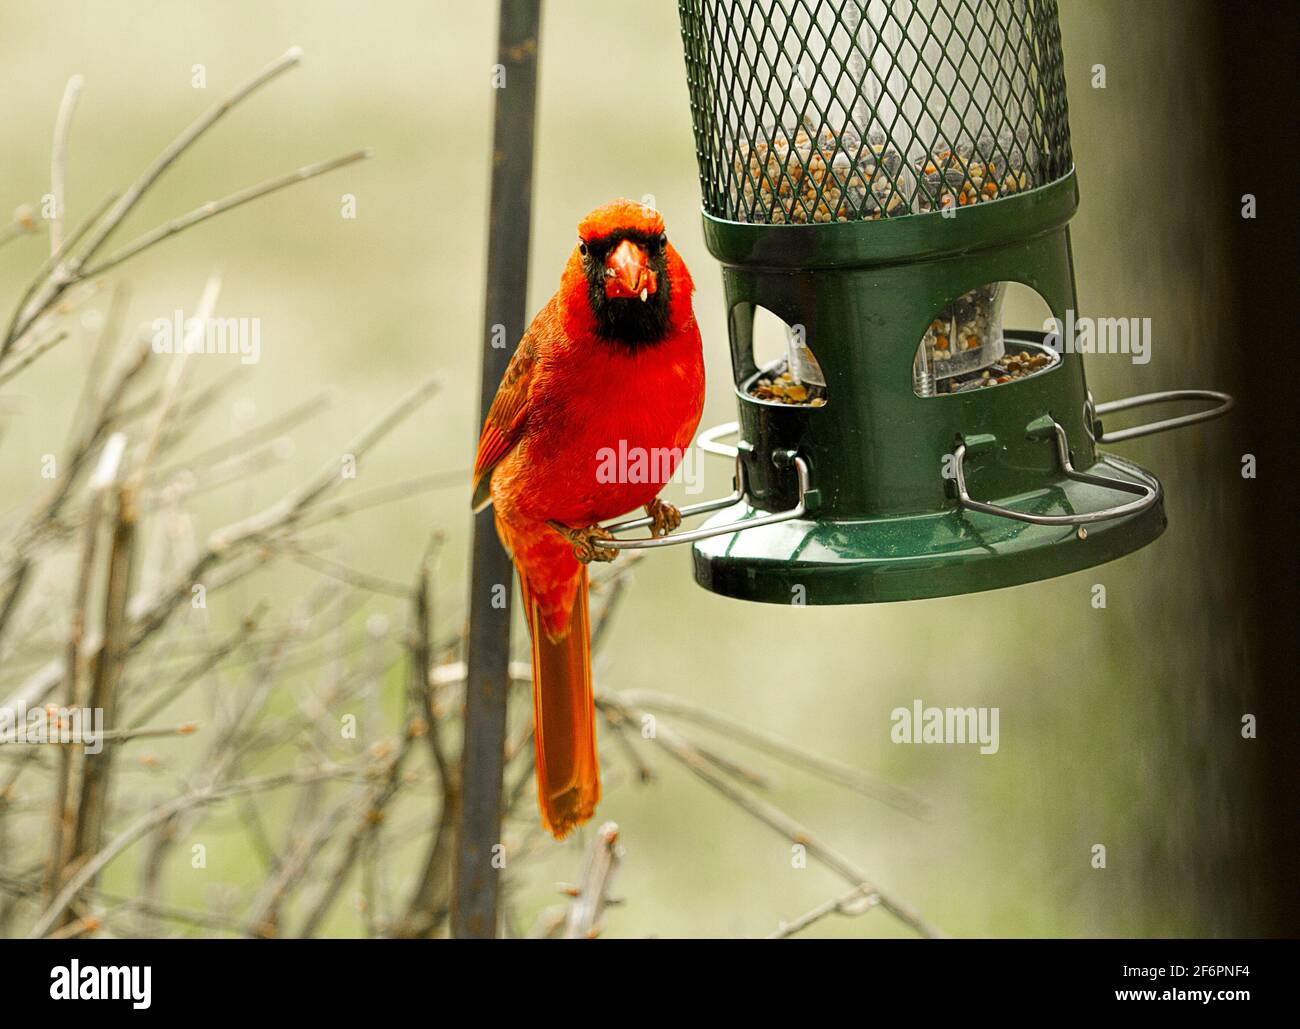 Majestic red cardinal closeups by bird feeder being watchful of his surroundings. Stock Photo